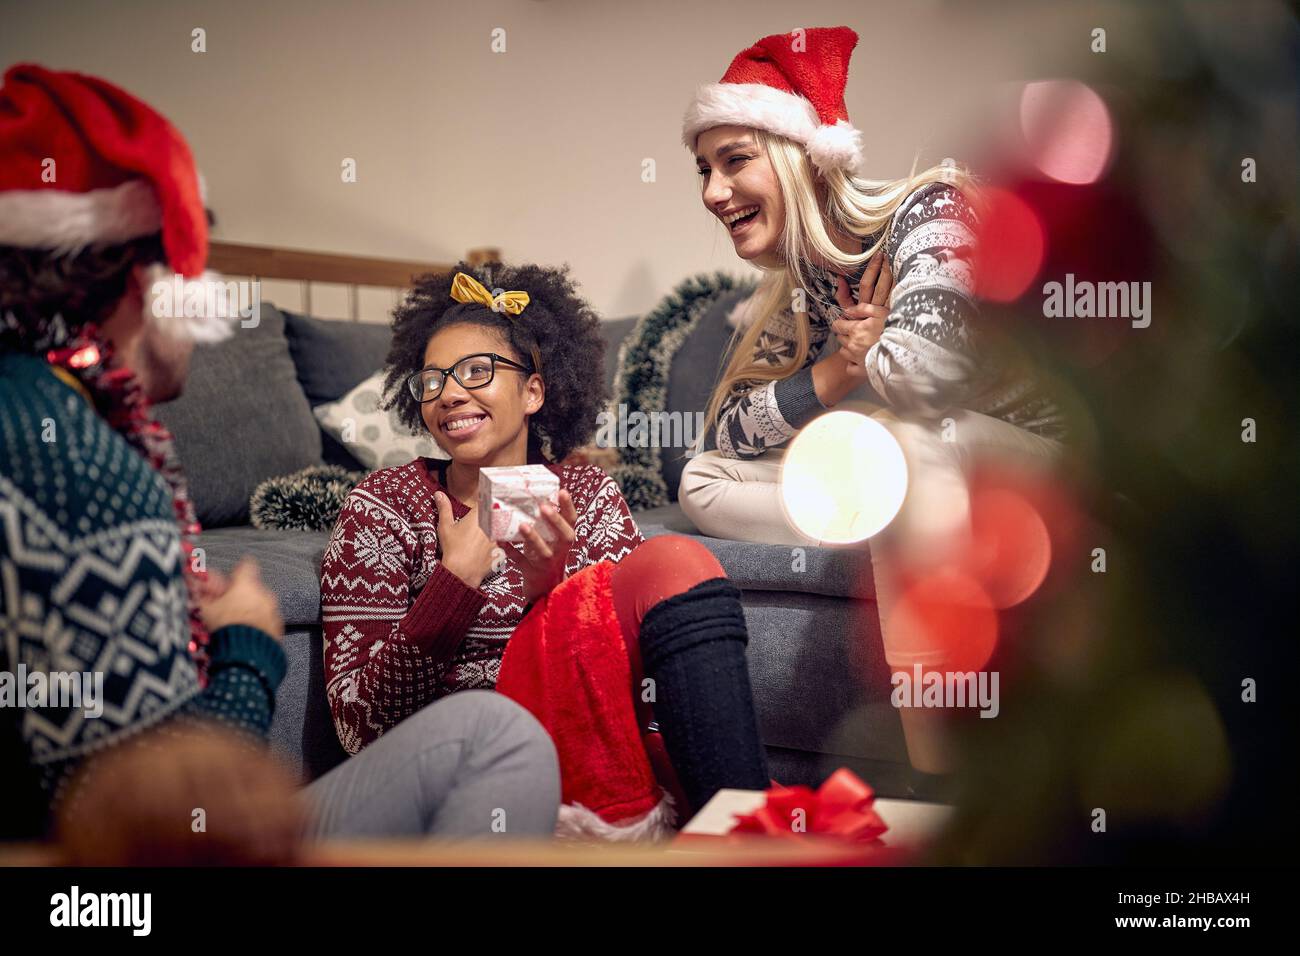 A girl is touched by a present she got from friends during New Year party in a festive atmosphere at home. Christmas, New Year, holiday, party Stock Photo